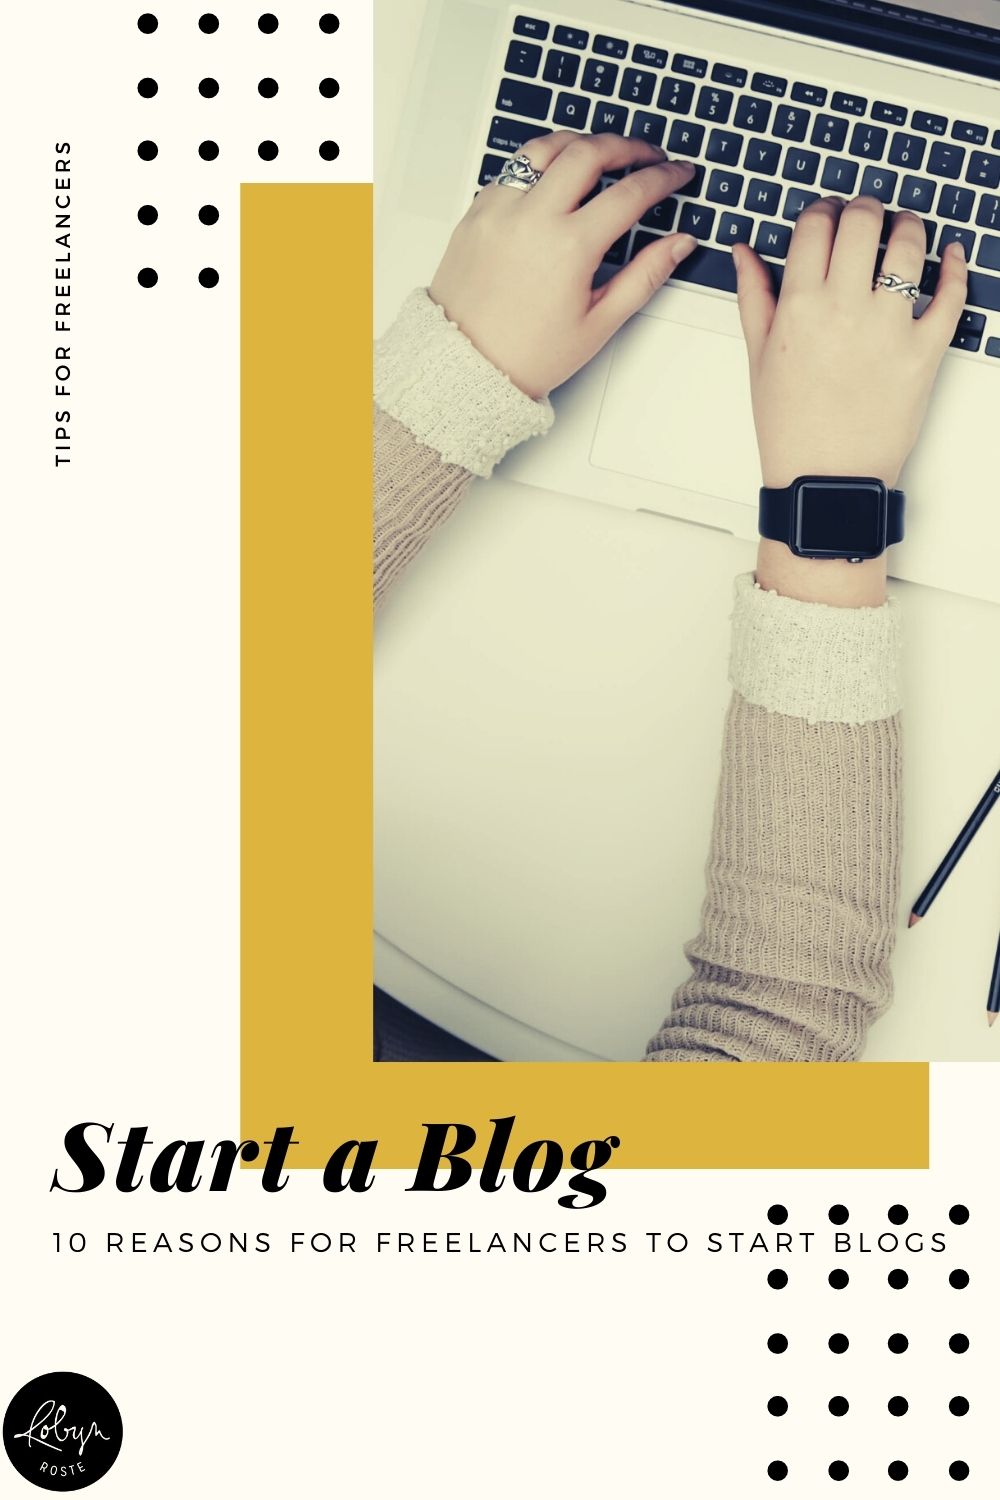 If you're thinking maybe it's time to start a blog, I hope this overview helps you decide one way or the other. I highly recommend blogging!